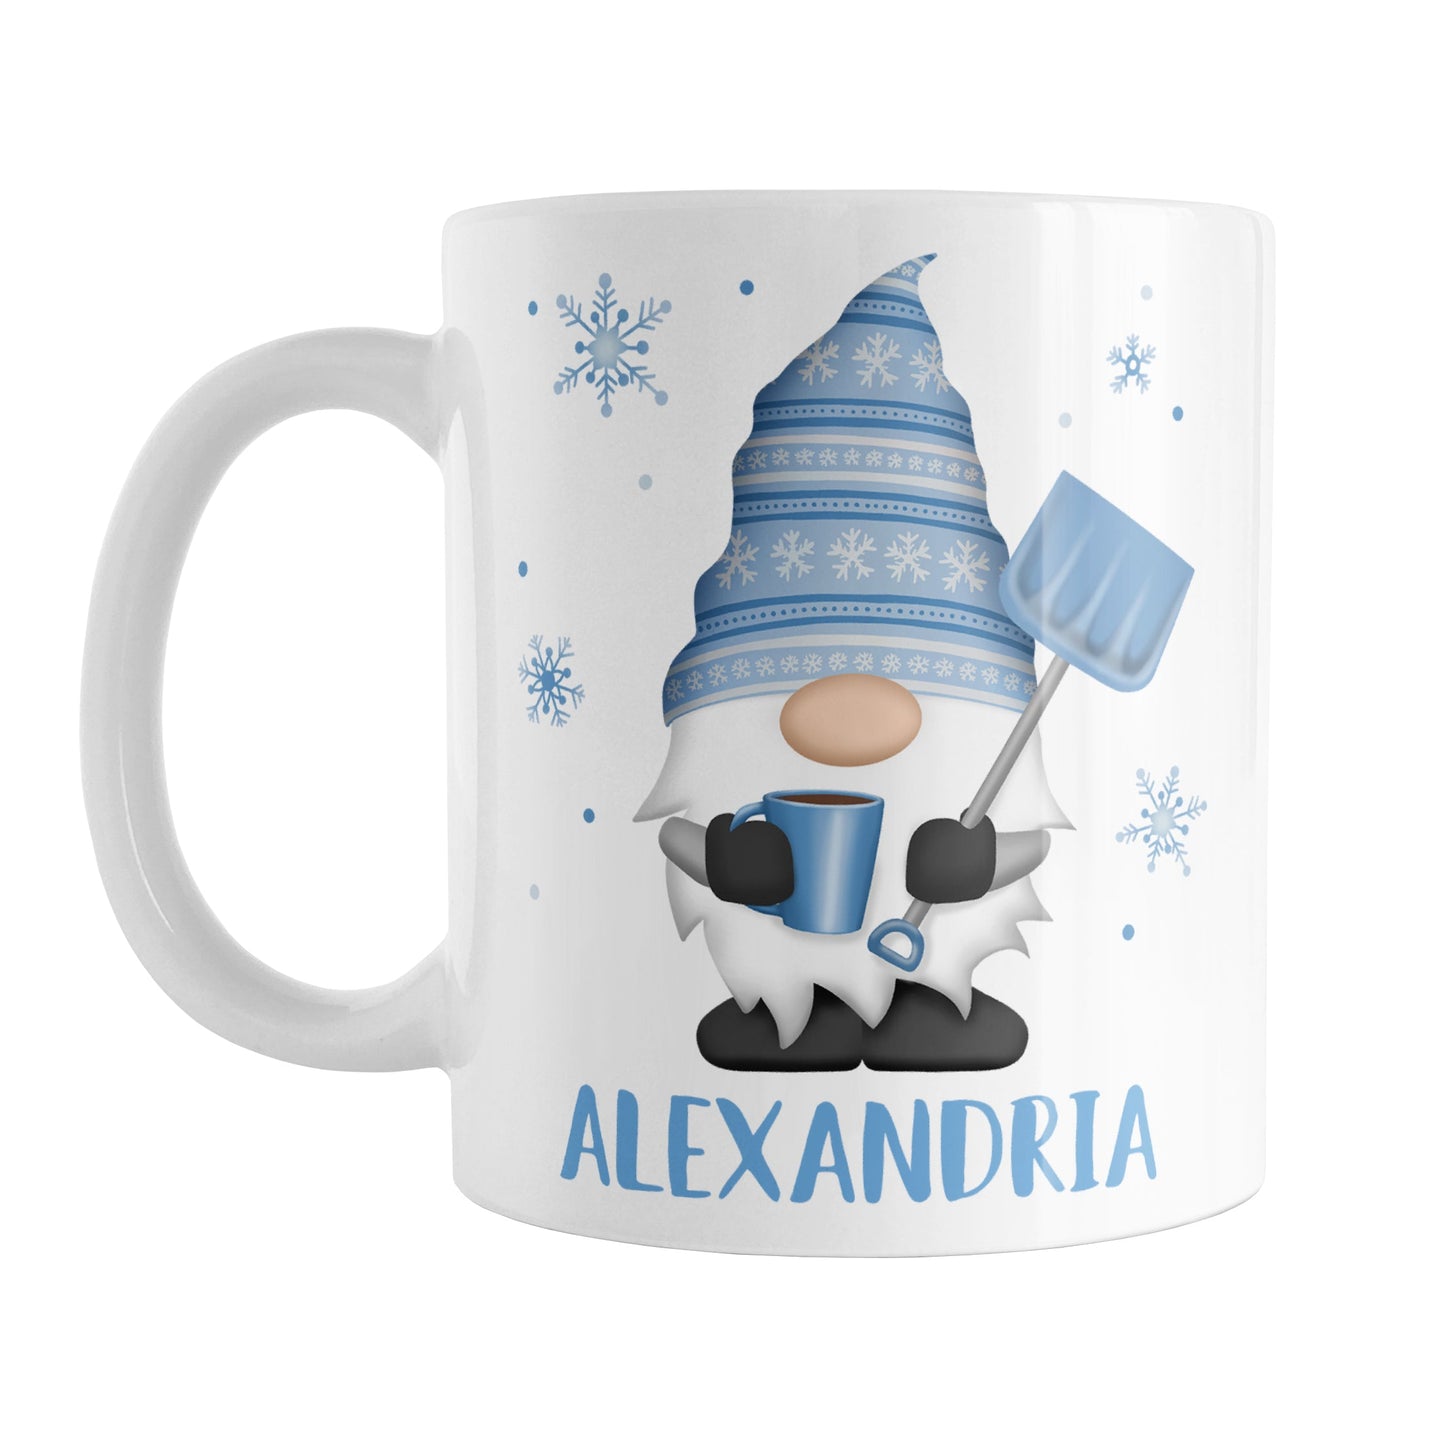 Personalized Winter Snowflake Gnome Mug (11oz) at Amy's Coffee Mugs. A ceramic coffee mug designed with a gnome on both sides of the mug wearing a festive blue snowflake hat and holding a hot beverage and a snow shovel, with snowflakes around it. Your name is custom printed in blue below the gnome.